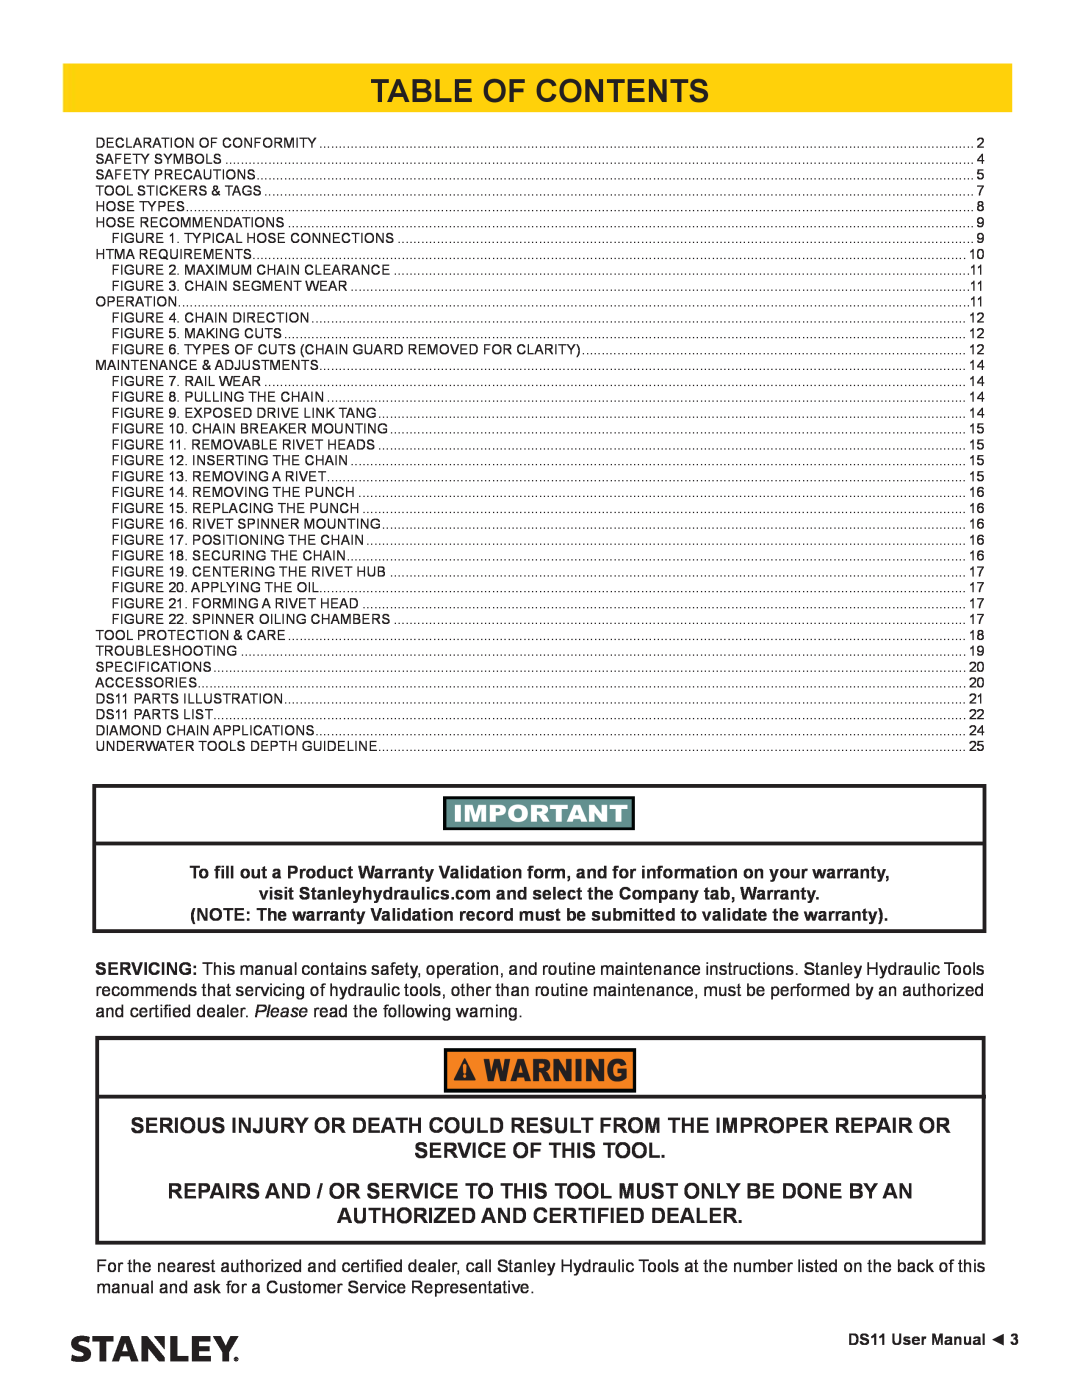 Stanley Black & Decker DS11 user manual Table Of Contents, Service Of This Tool, Authorized And Certified Dealer 